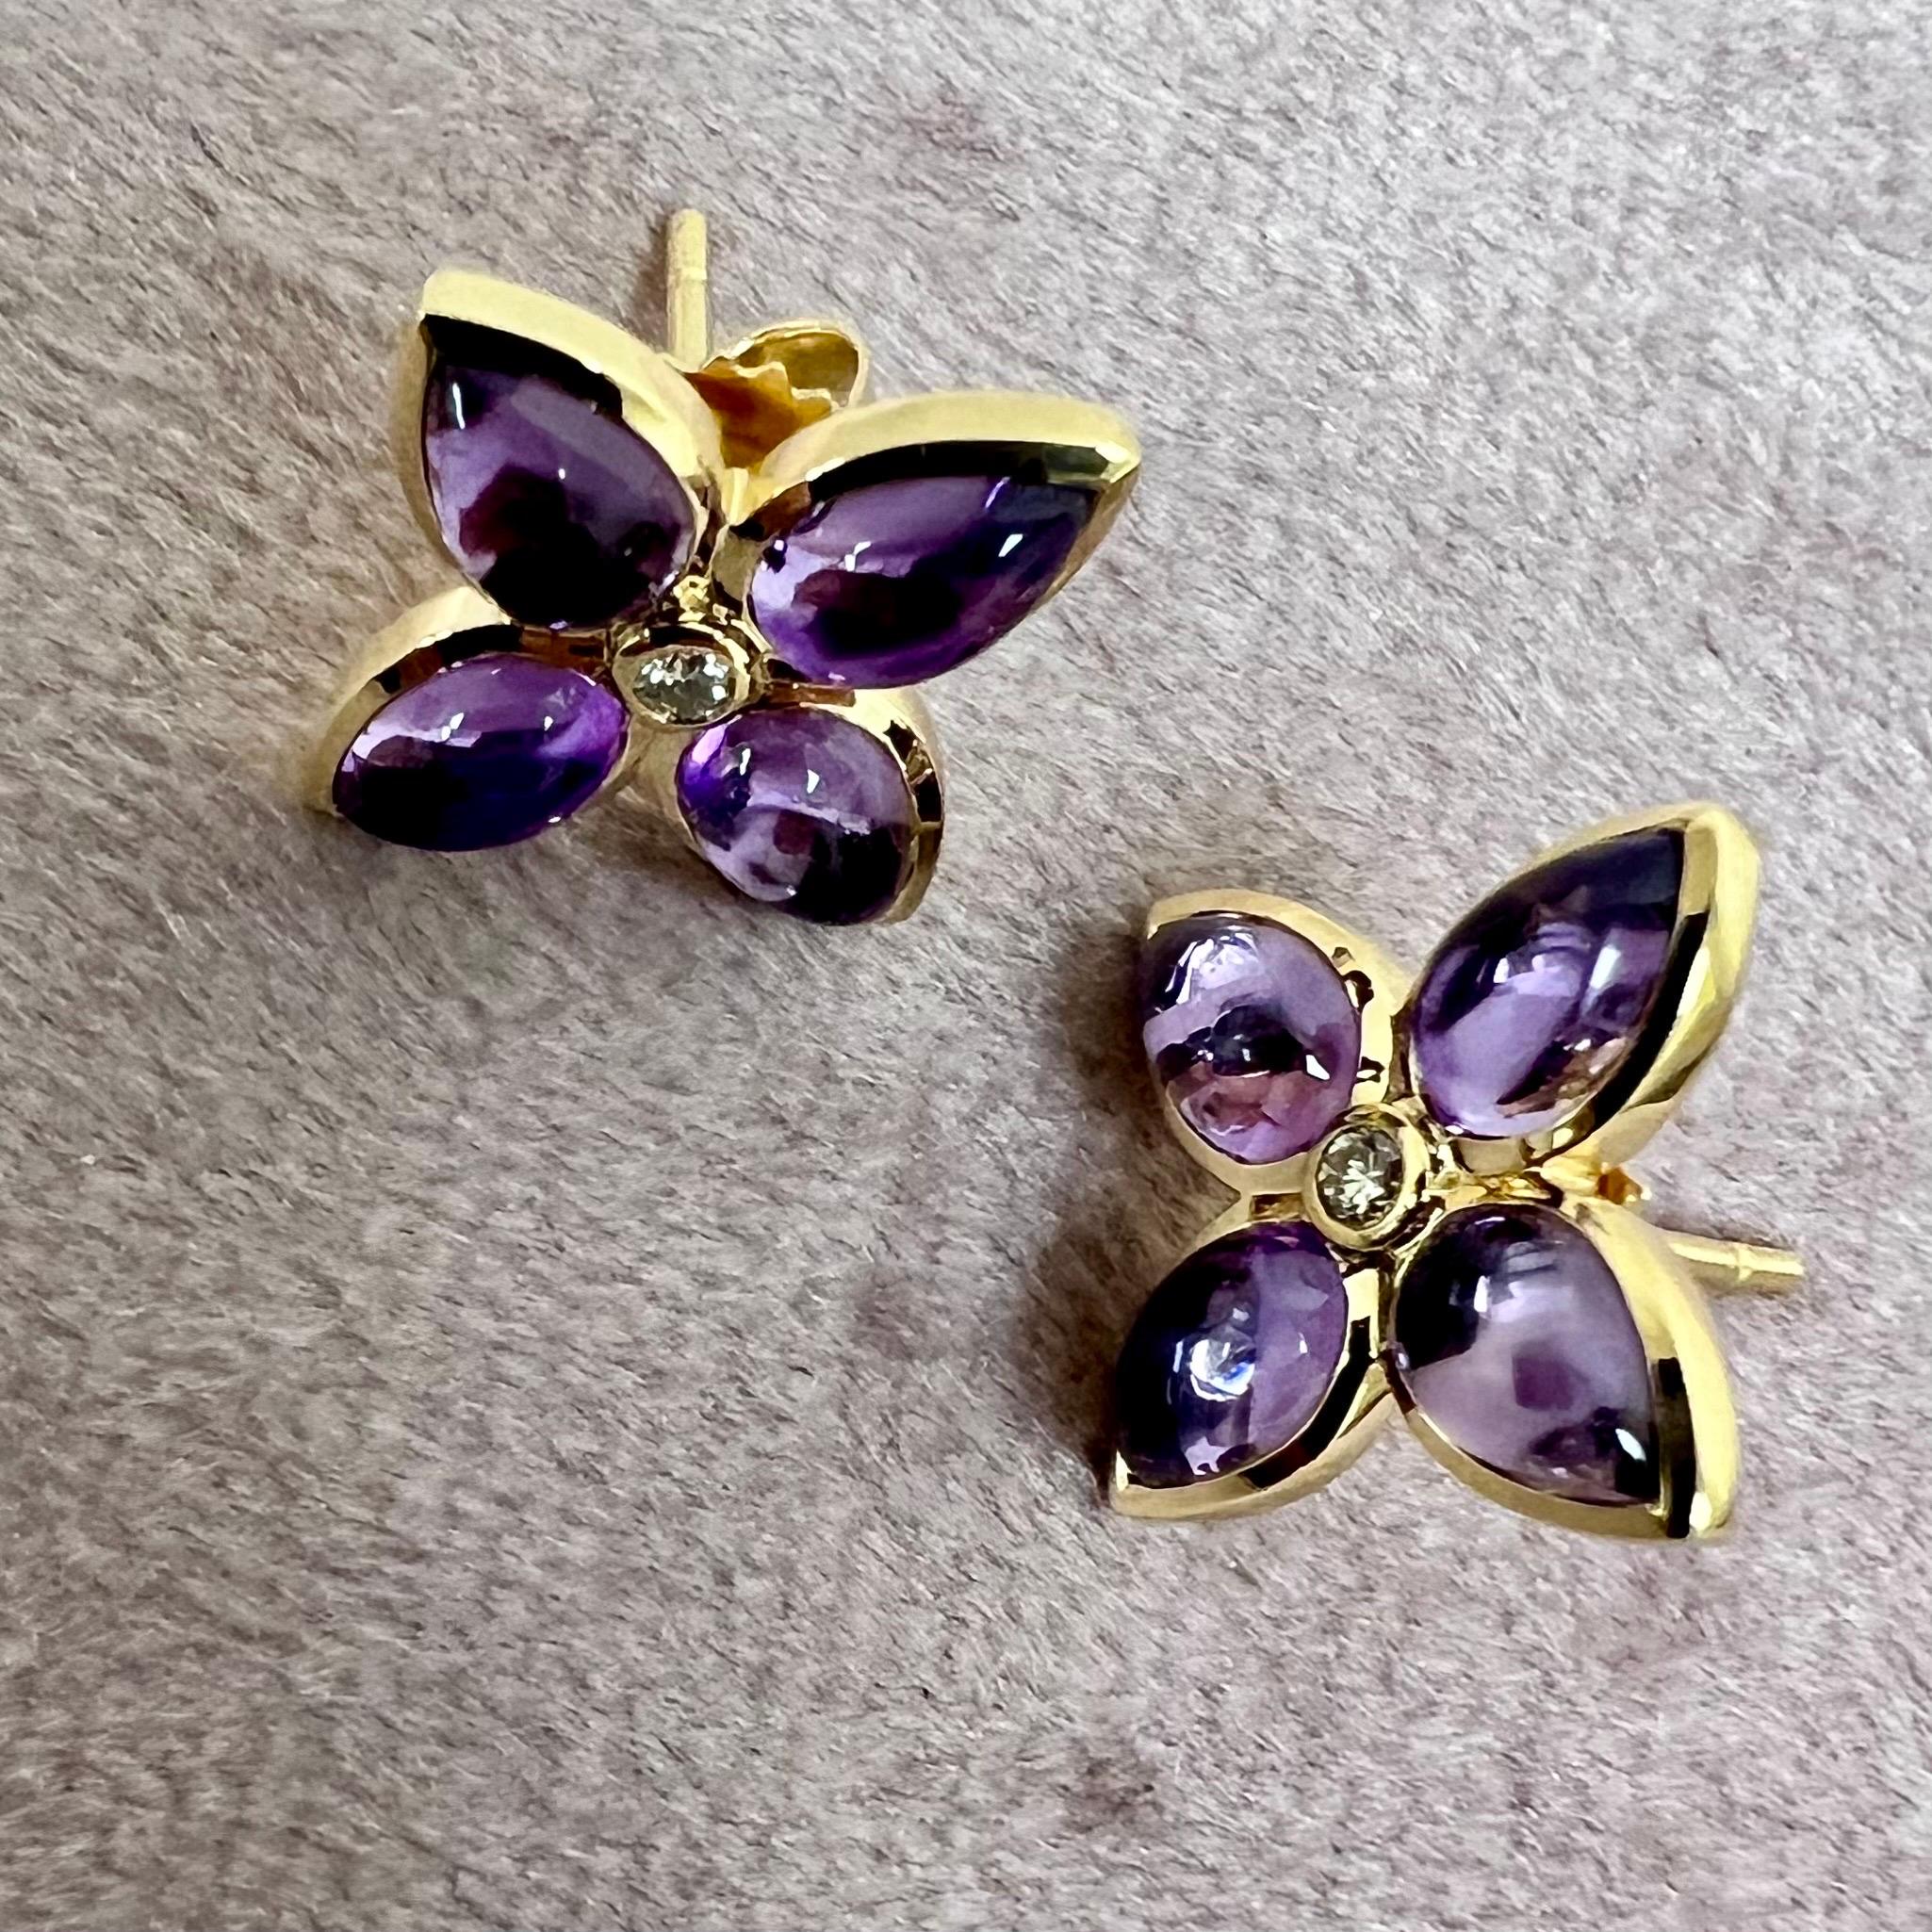 Mixed Cut Syna Yellow Gold Amethyst Flower Studs with Diamonds